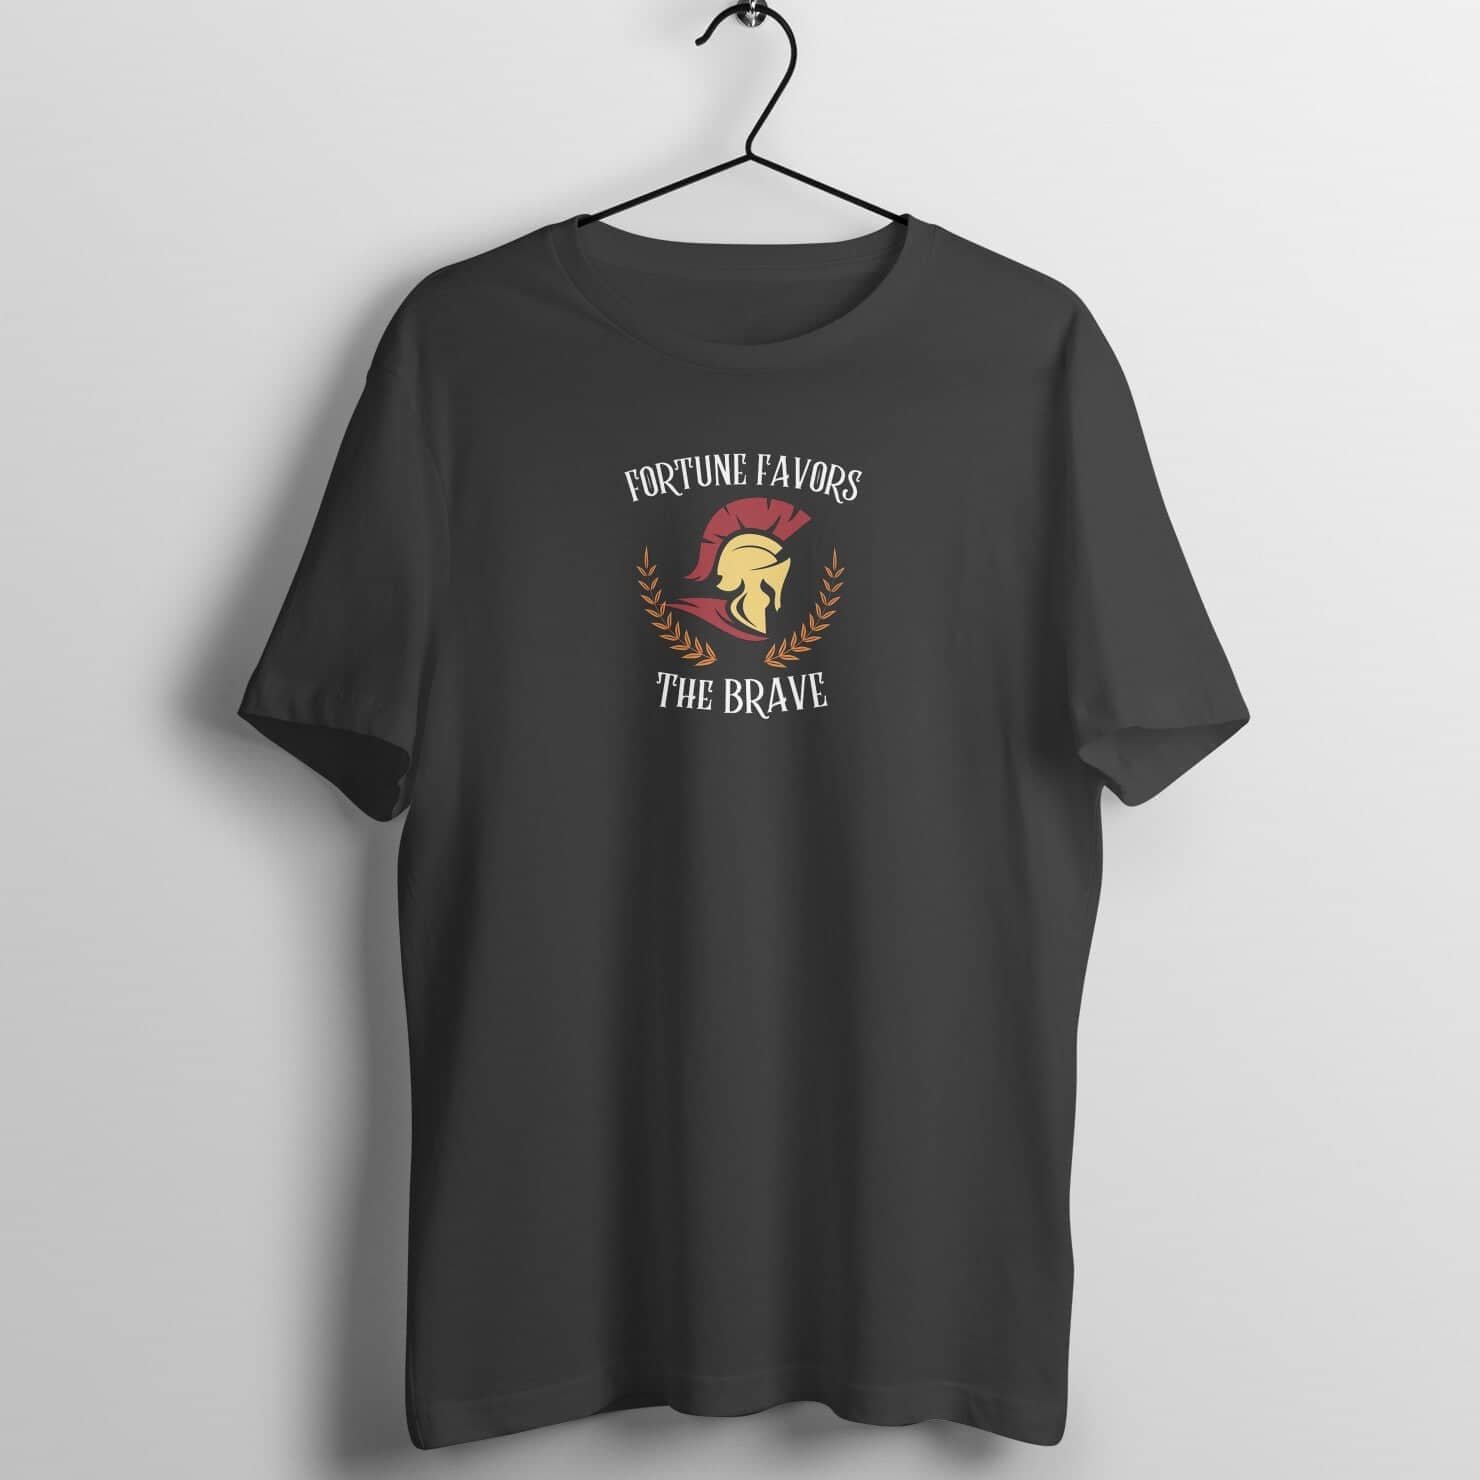 Fortune Favors The Brave Exclusive Black T Shirt for Men and Women freeshipping - Catch My Drift India